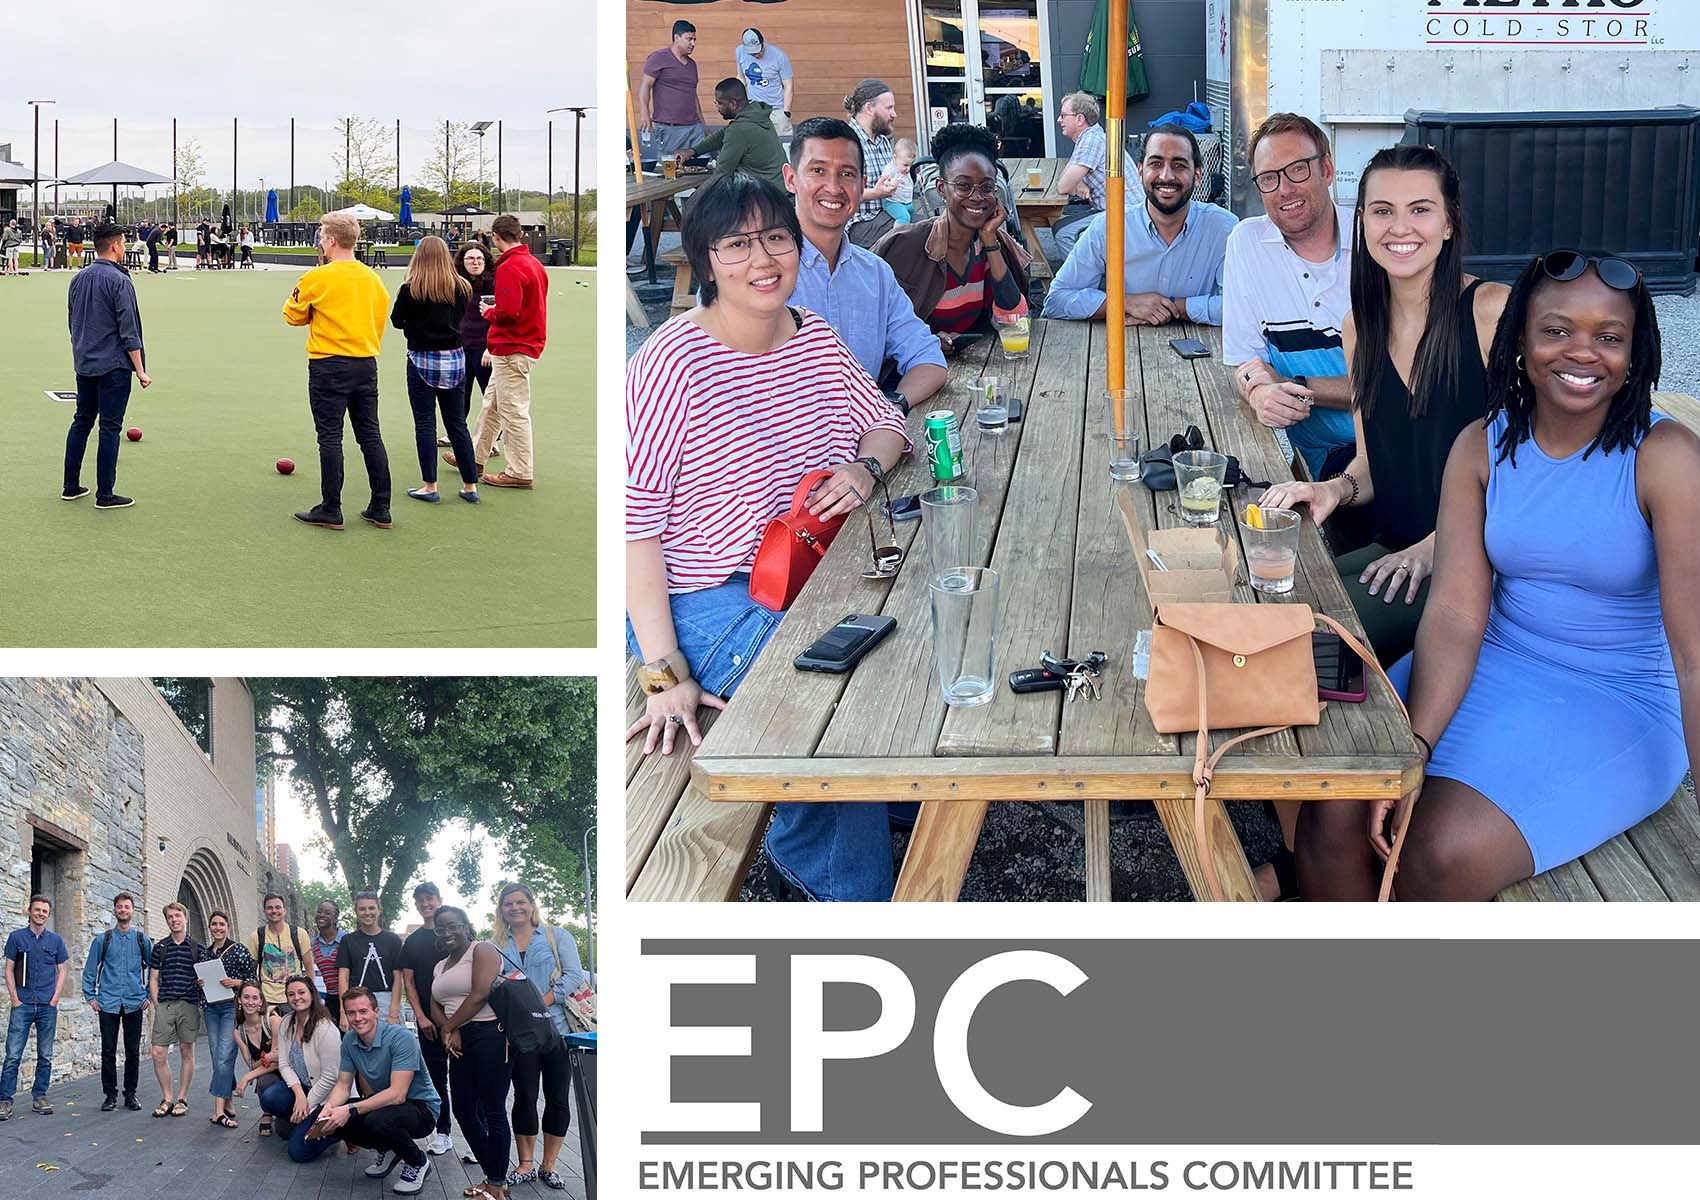 Emerging Professionals Committee (EPC)